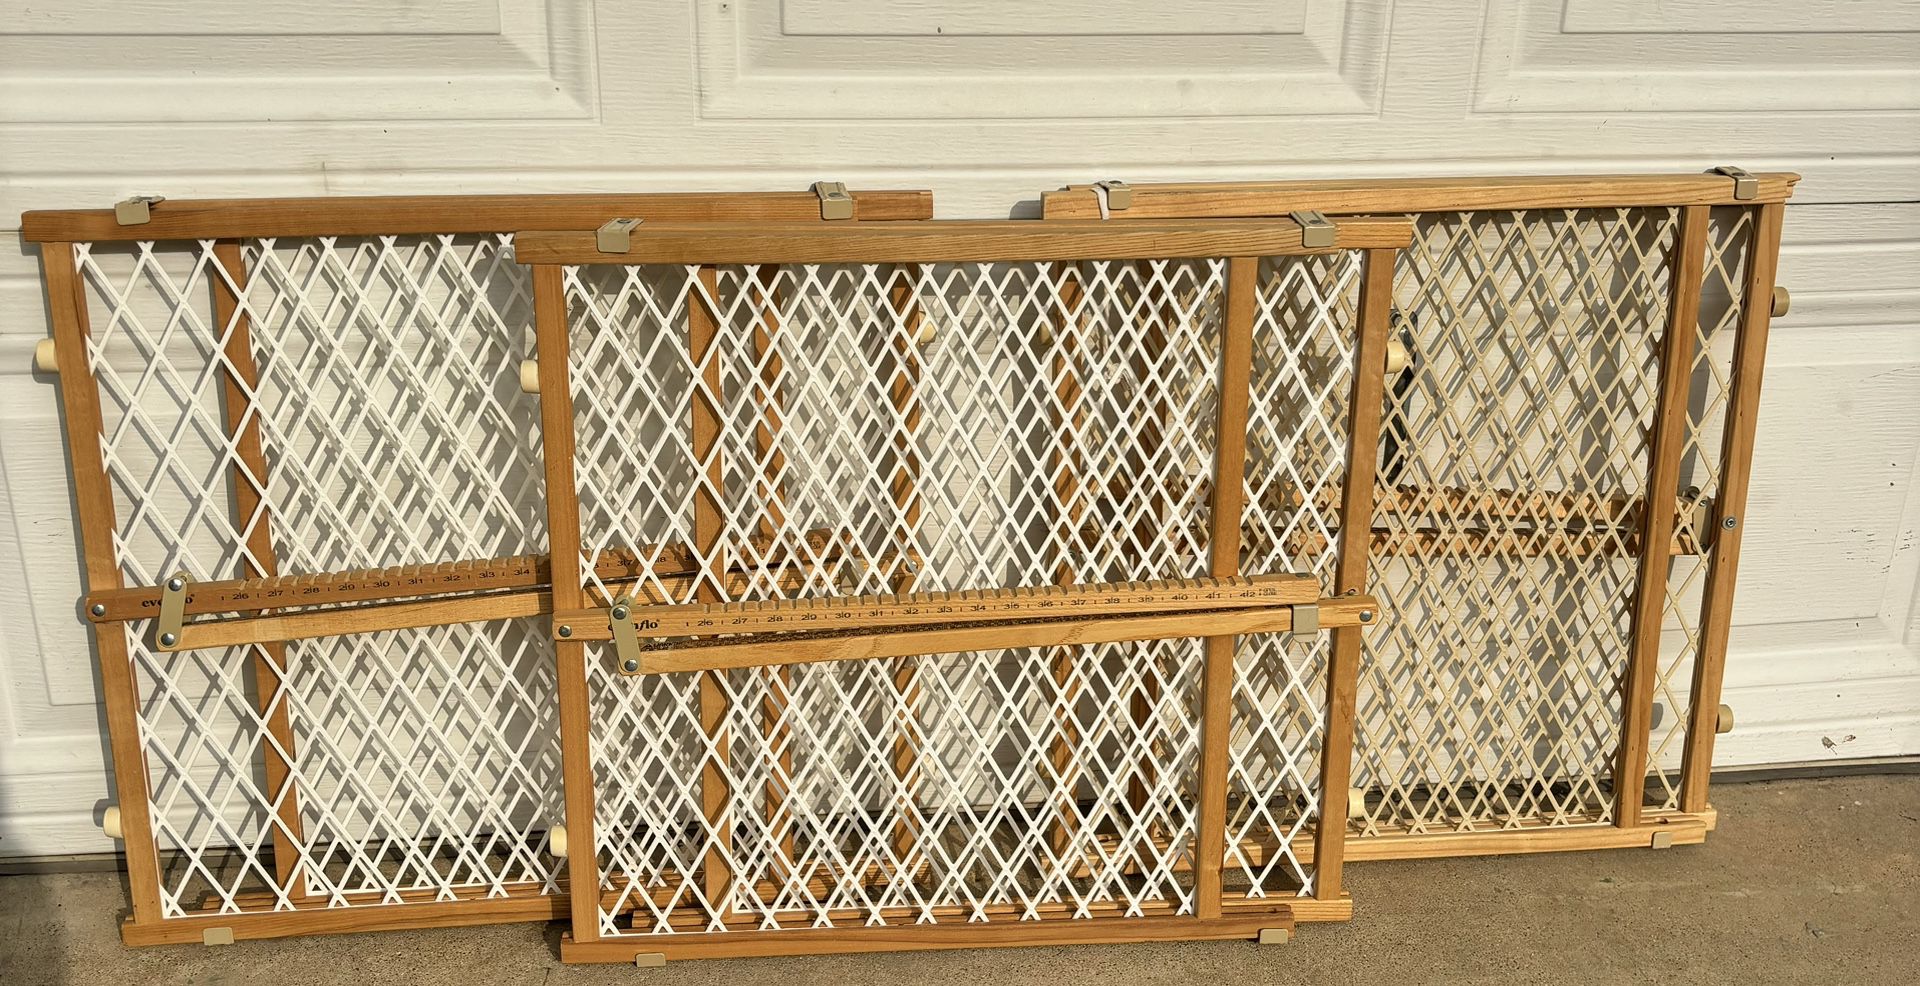 Title set of 3 Baby dog cat pet gate 26" to 42" wide adjustable pressure fit no holes new In condition all